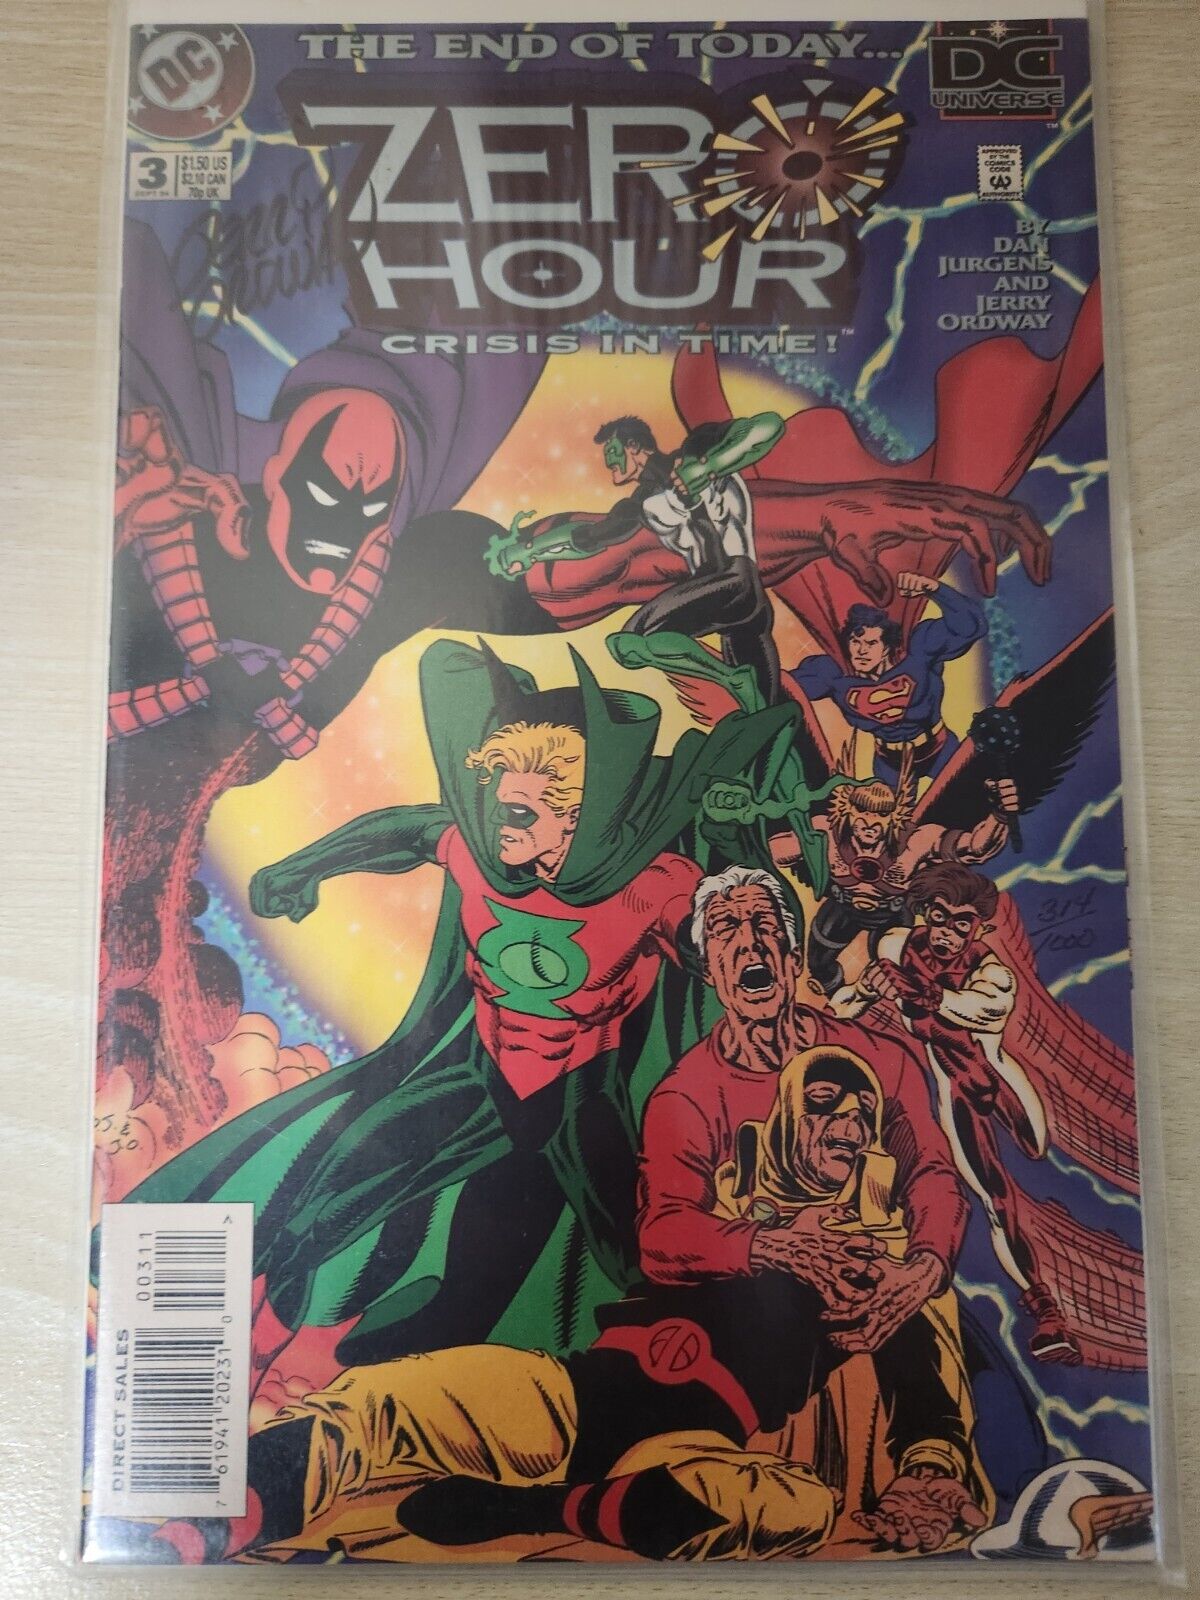 Zero Hour: Crisis in Time #3 (DC Comics 1994) Autographed by Jerry Ordway w/COA